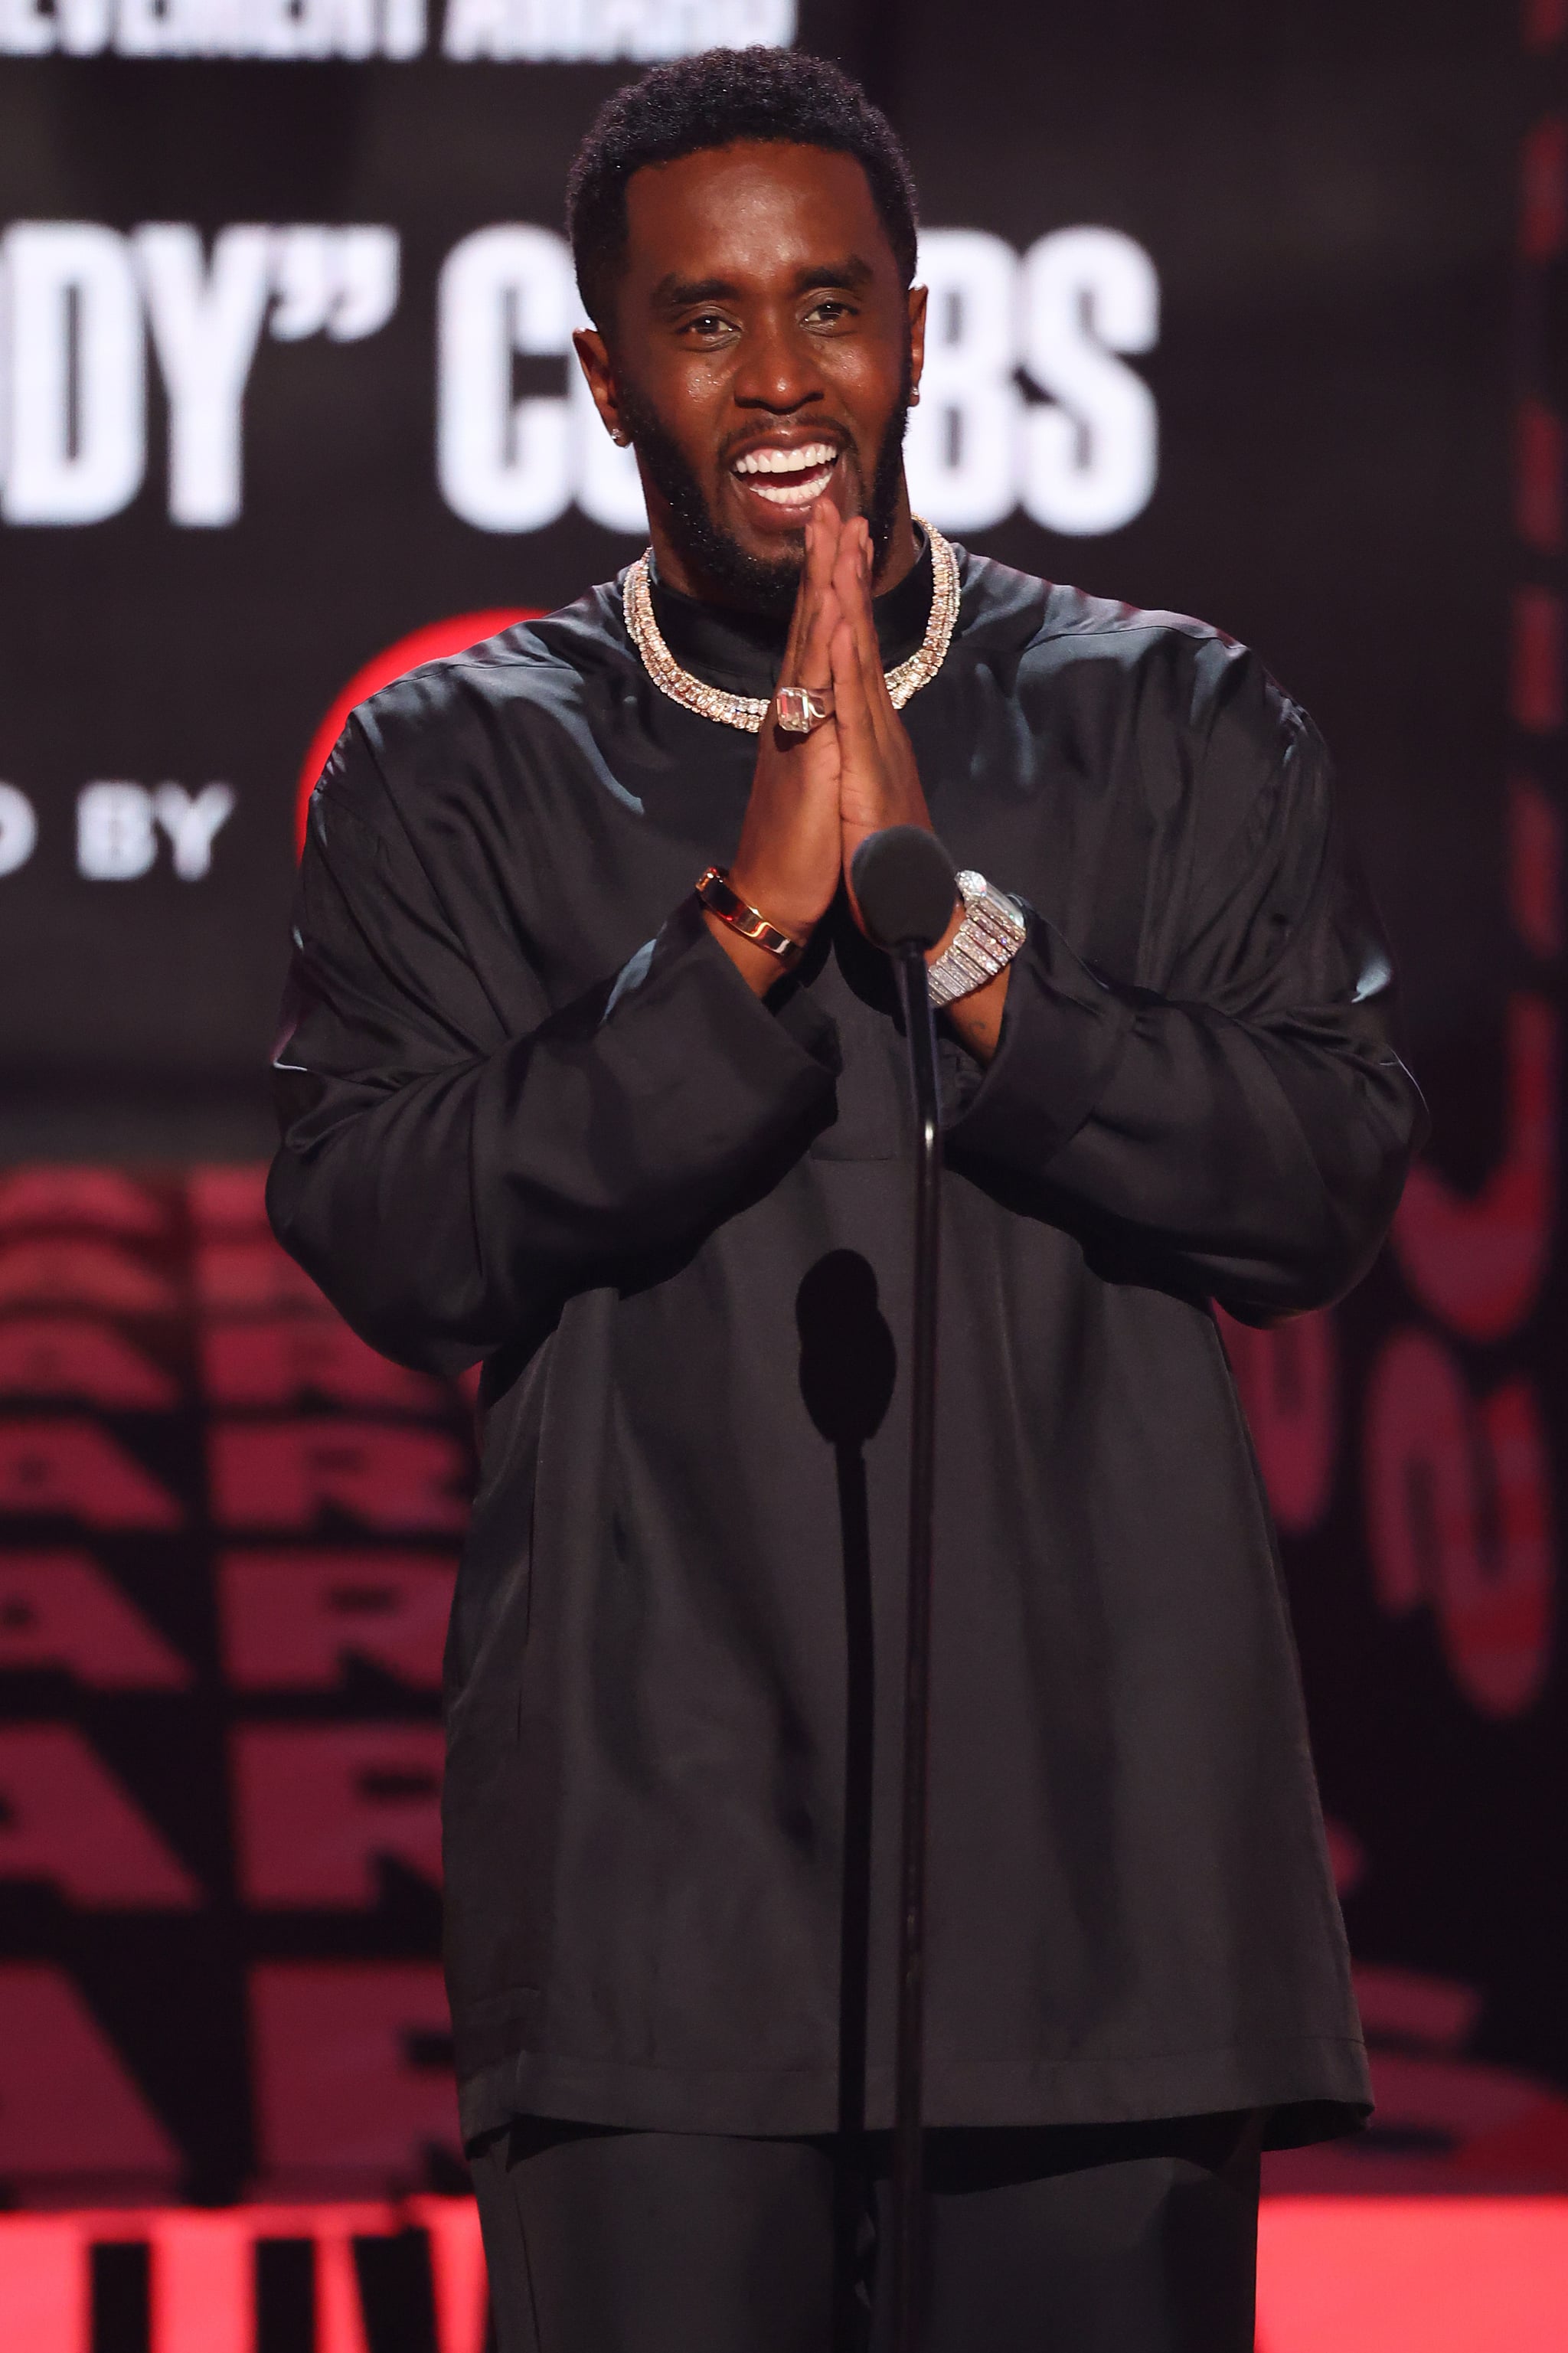 LOS ANGELES, CALIFORNIA - JUNE 26: Honoree Sean 'Diddy' Combs accepts the BET Lifetime Achievement Award onstage during the 2022 BET Awards at Microsoft Theater on June 26, 2022 in Los Angeles, California.  (Photo by Leon Bennett/Getty Images for BET)